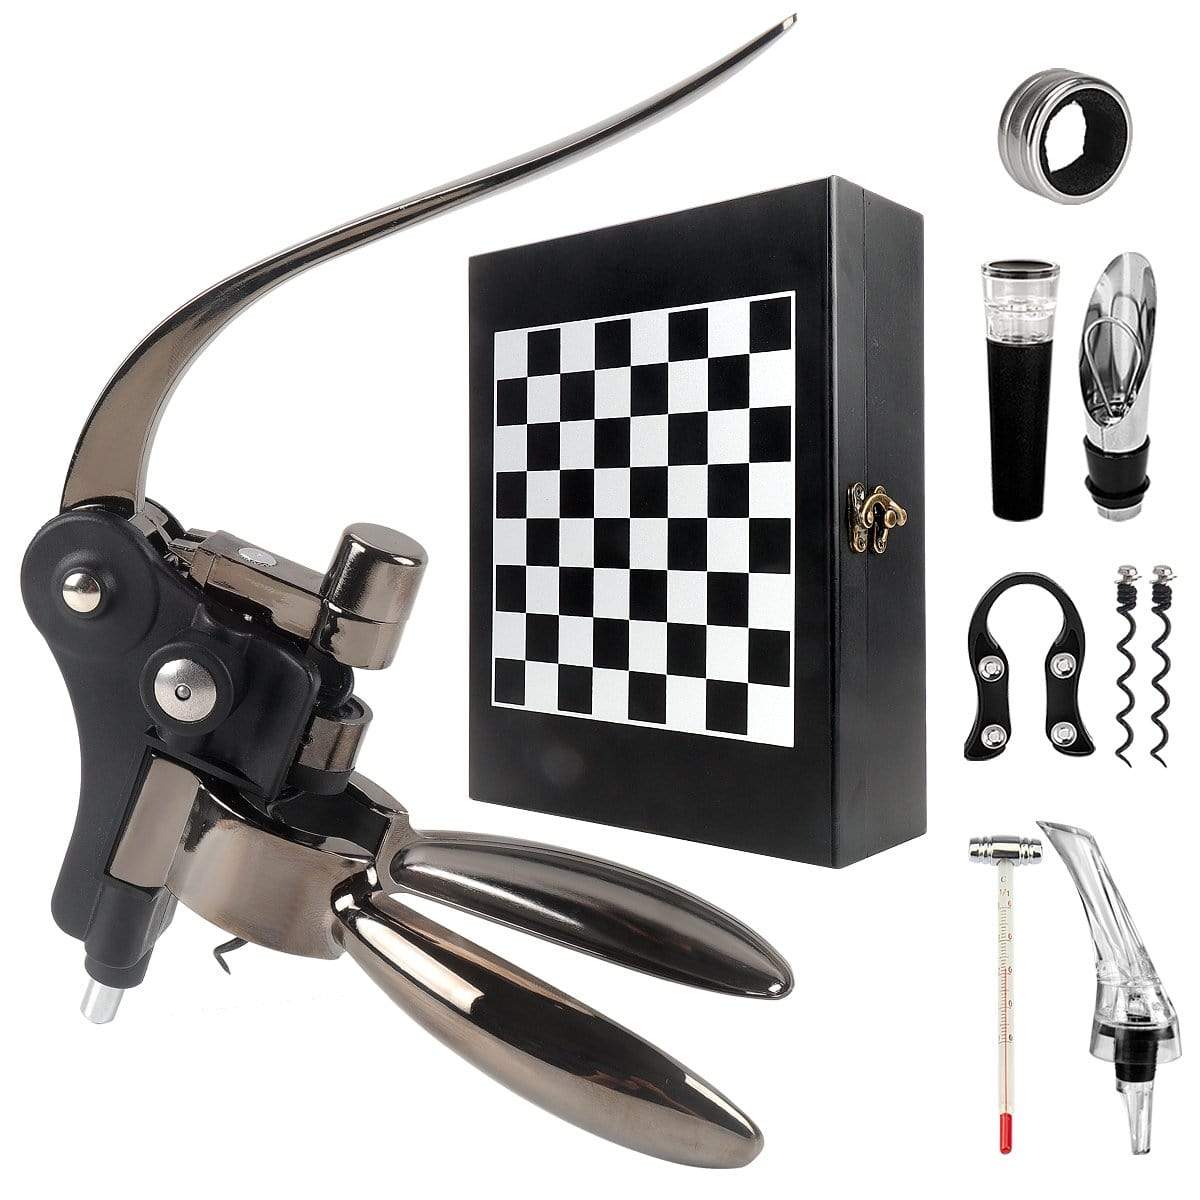 Wine Accessory Gift Set Black with Chess